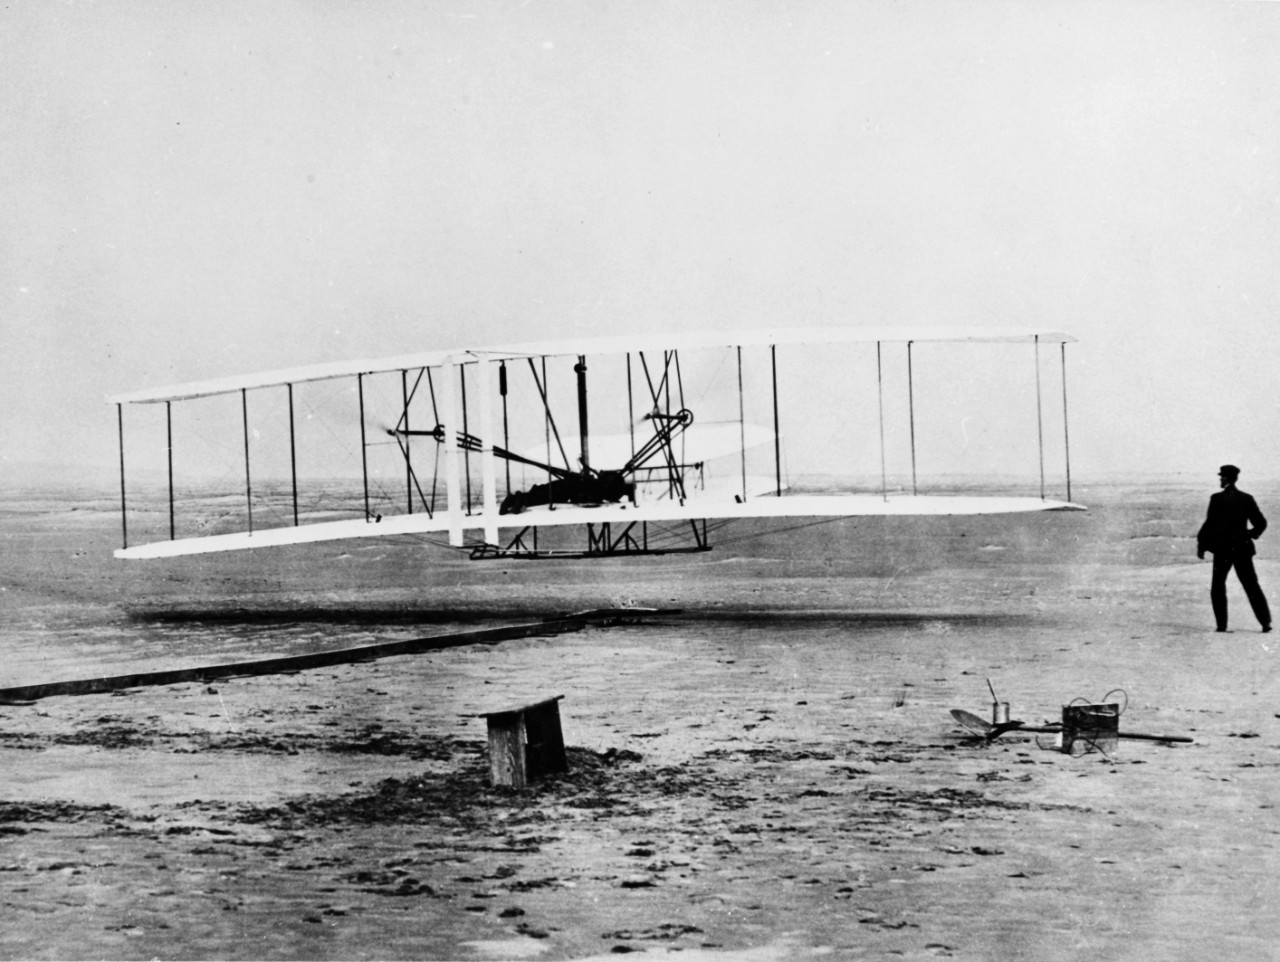 Orville Wright pilots the Wright Flyer in the first manned powered flight, at Kitty Hawk, North Carolina, 17 December 1903